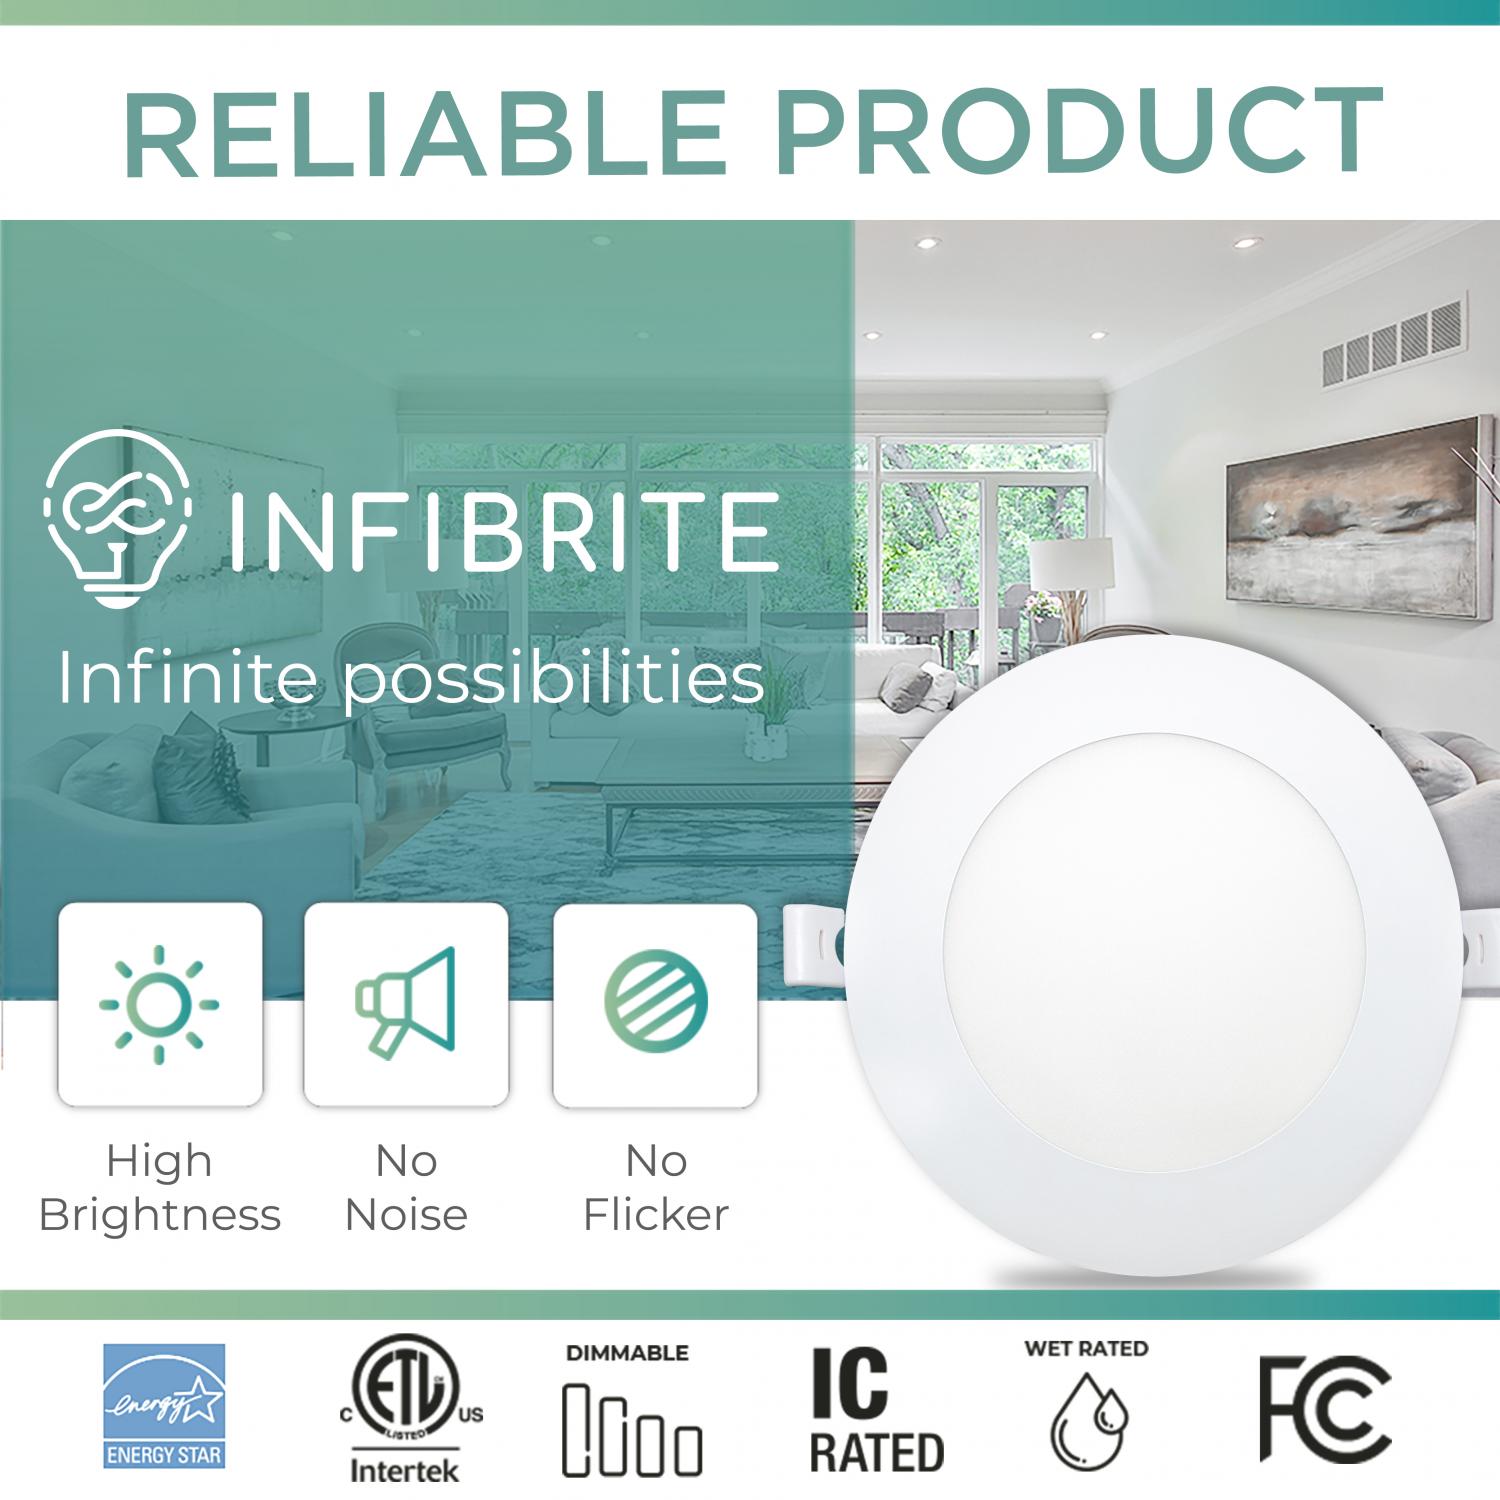 Infibrite 6 Inch 6000K Clear White 12W 1050LM Ultra-Slim LED Ceiling Light with Junction Box, Flush Mount, Dimmable, Fixture for Bedroom, Wet Rated for Bathroom, Easy Install, 110W Eqv, ETL & Energy Star, US Company (6 Pack)